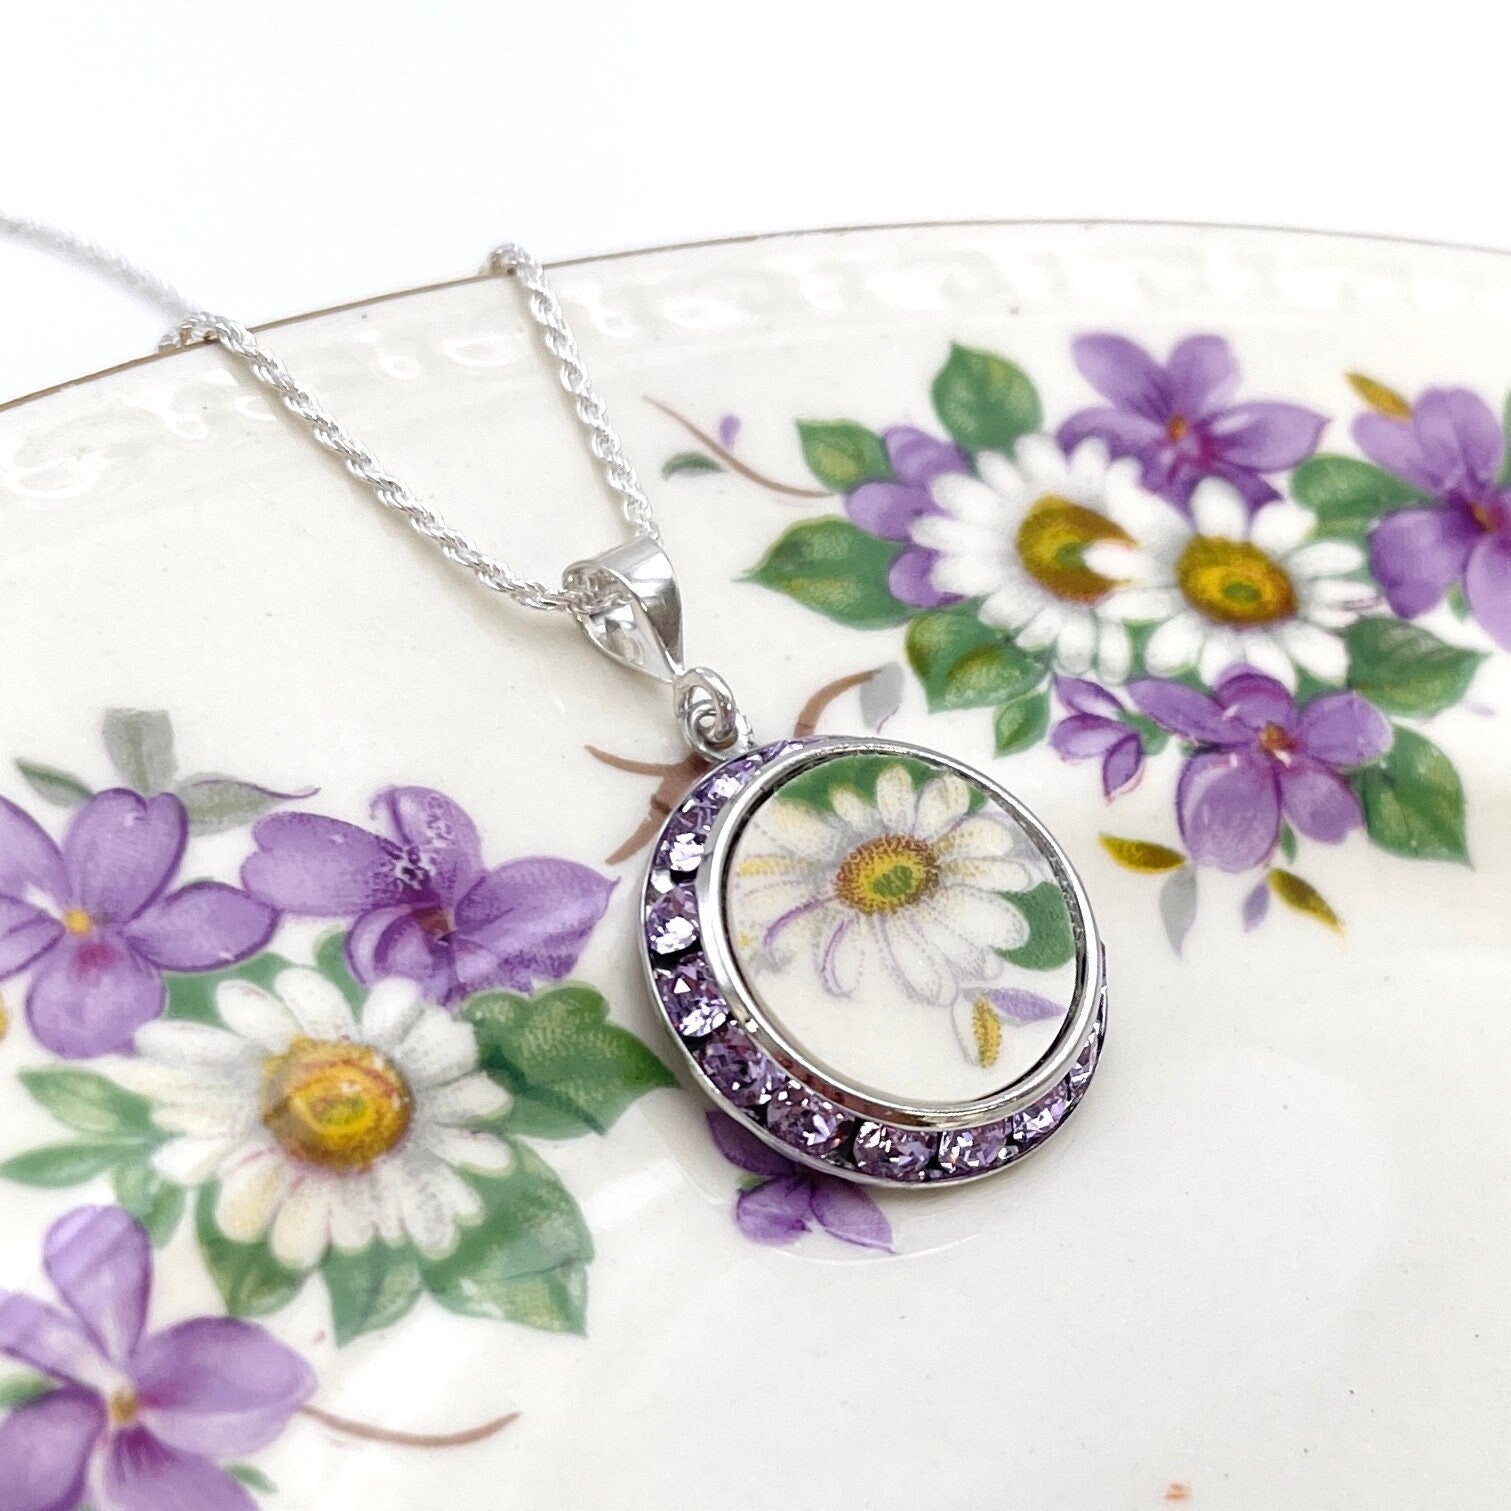 Broken China Jewelry Pendant Necklace, Crystal Daisy Necklace, Unique Gifts for Women, Birthday Gift for Her